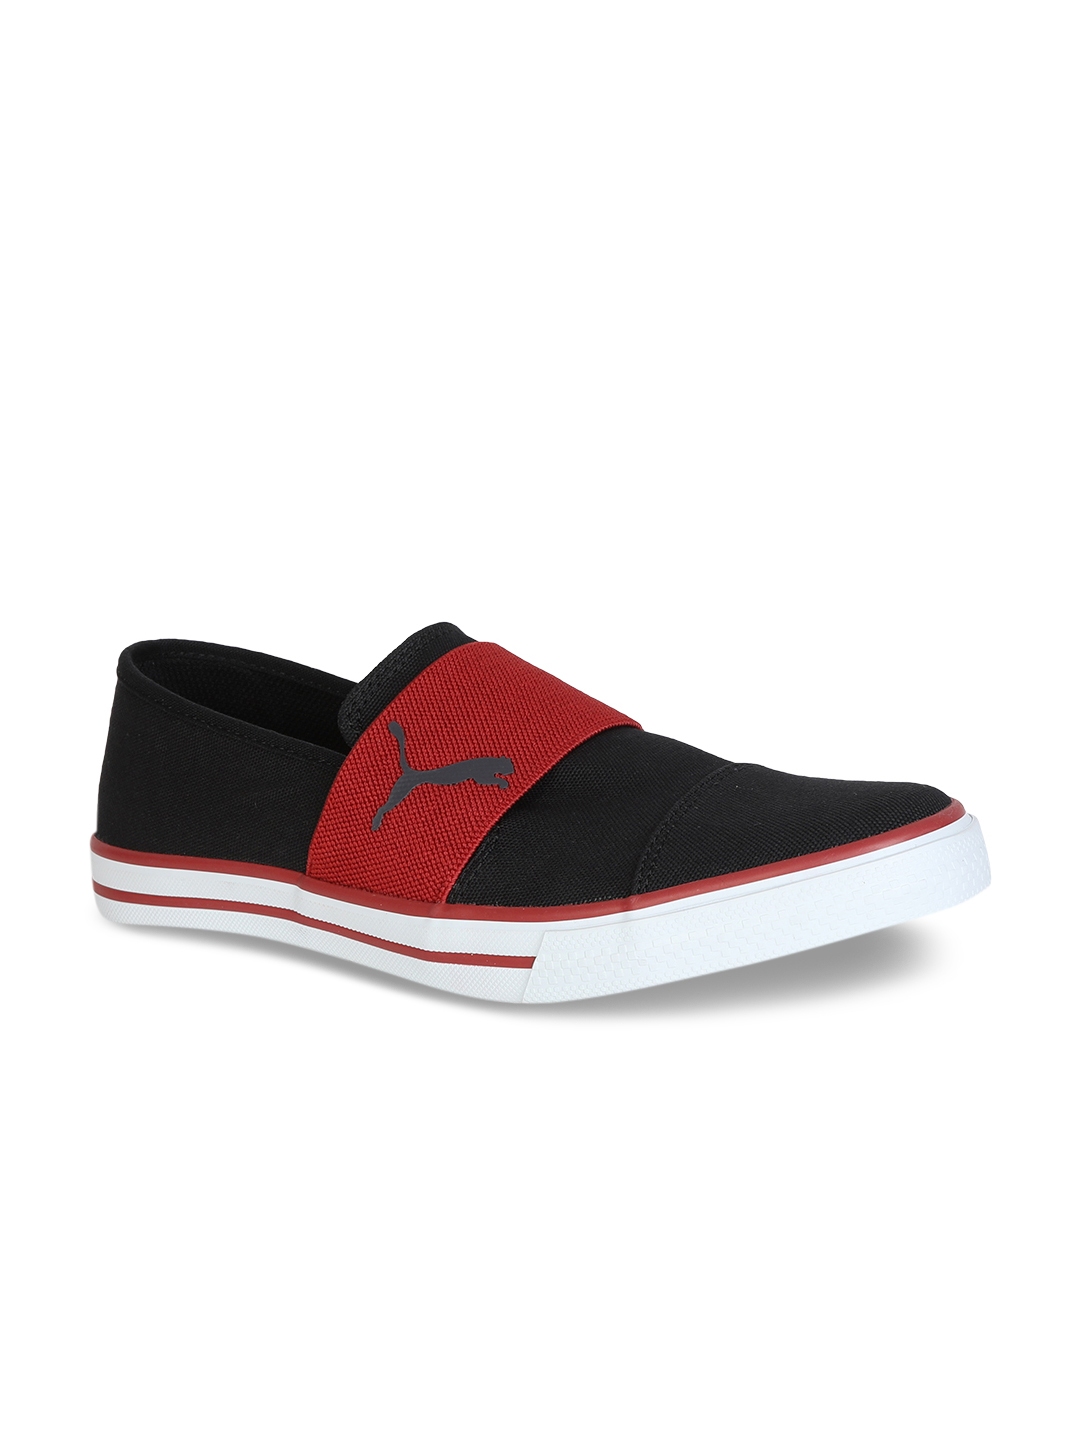 Buy Puma Men Black Colourblocked Slip On Sneakers - Casual Shoes for ...